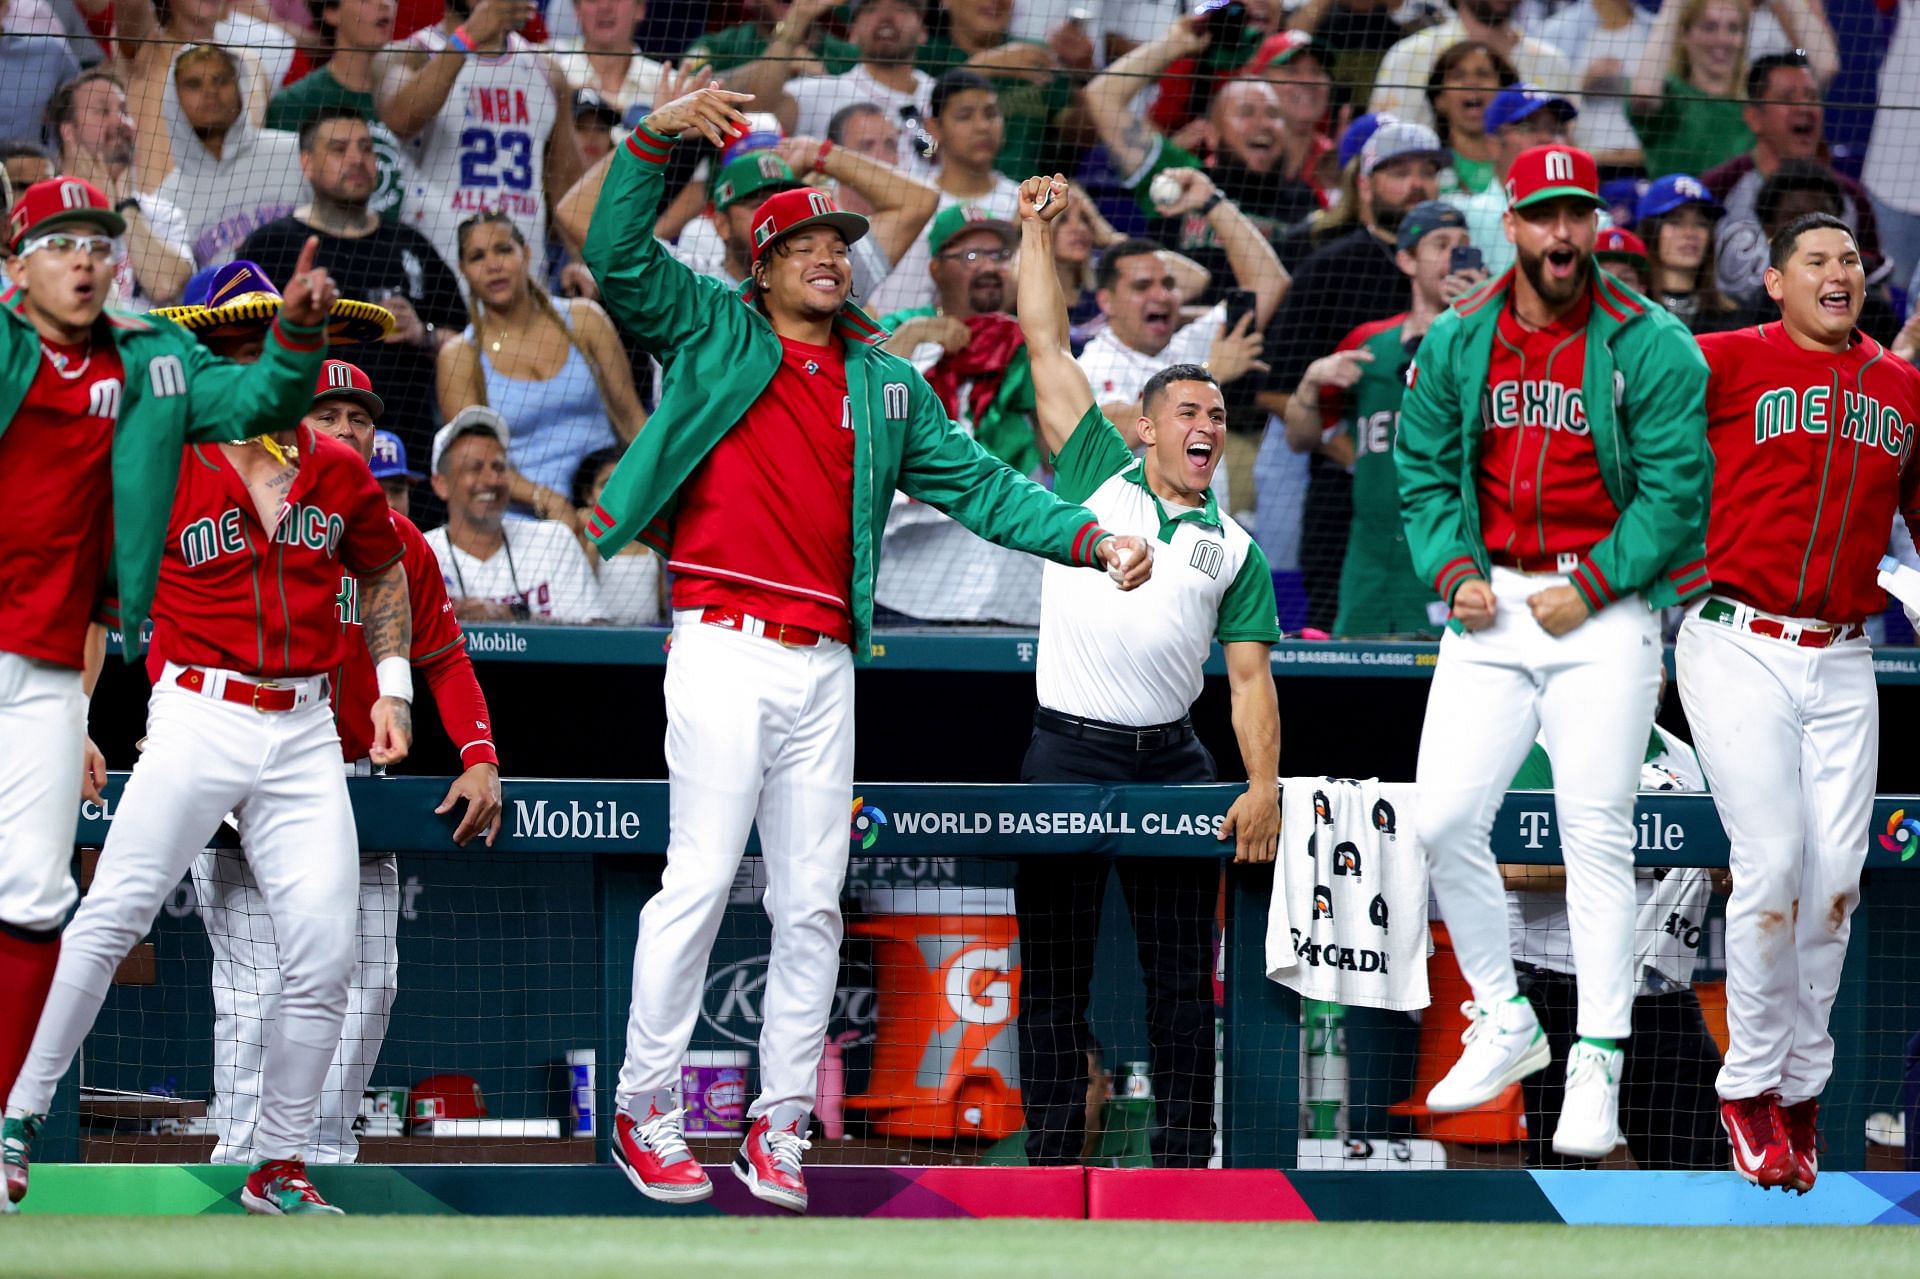 In this video, I discuss Mexico's alternate jersey in the World Baseba